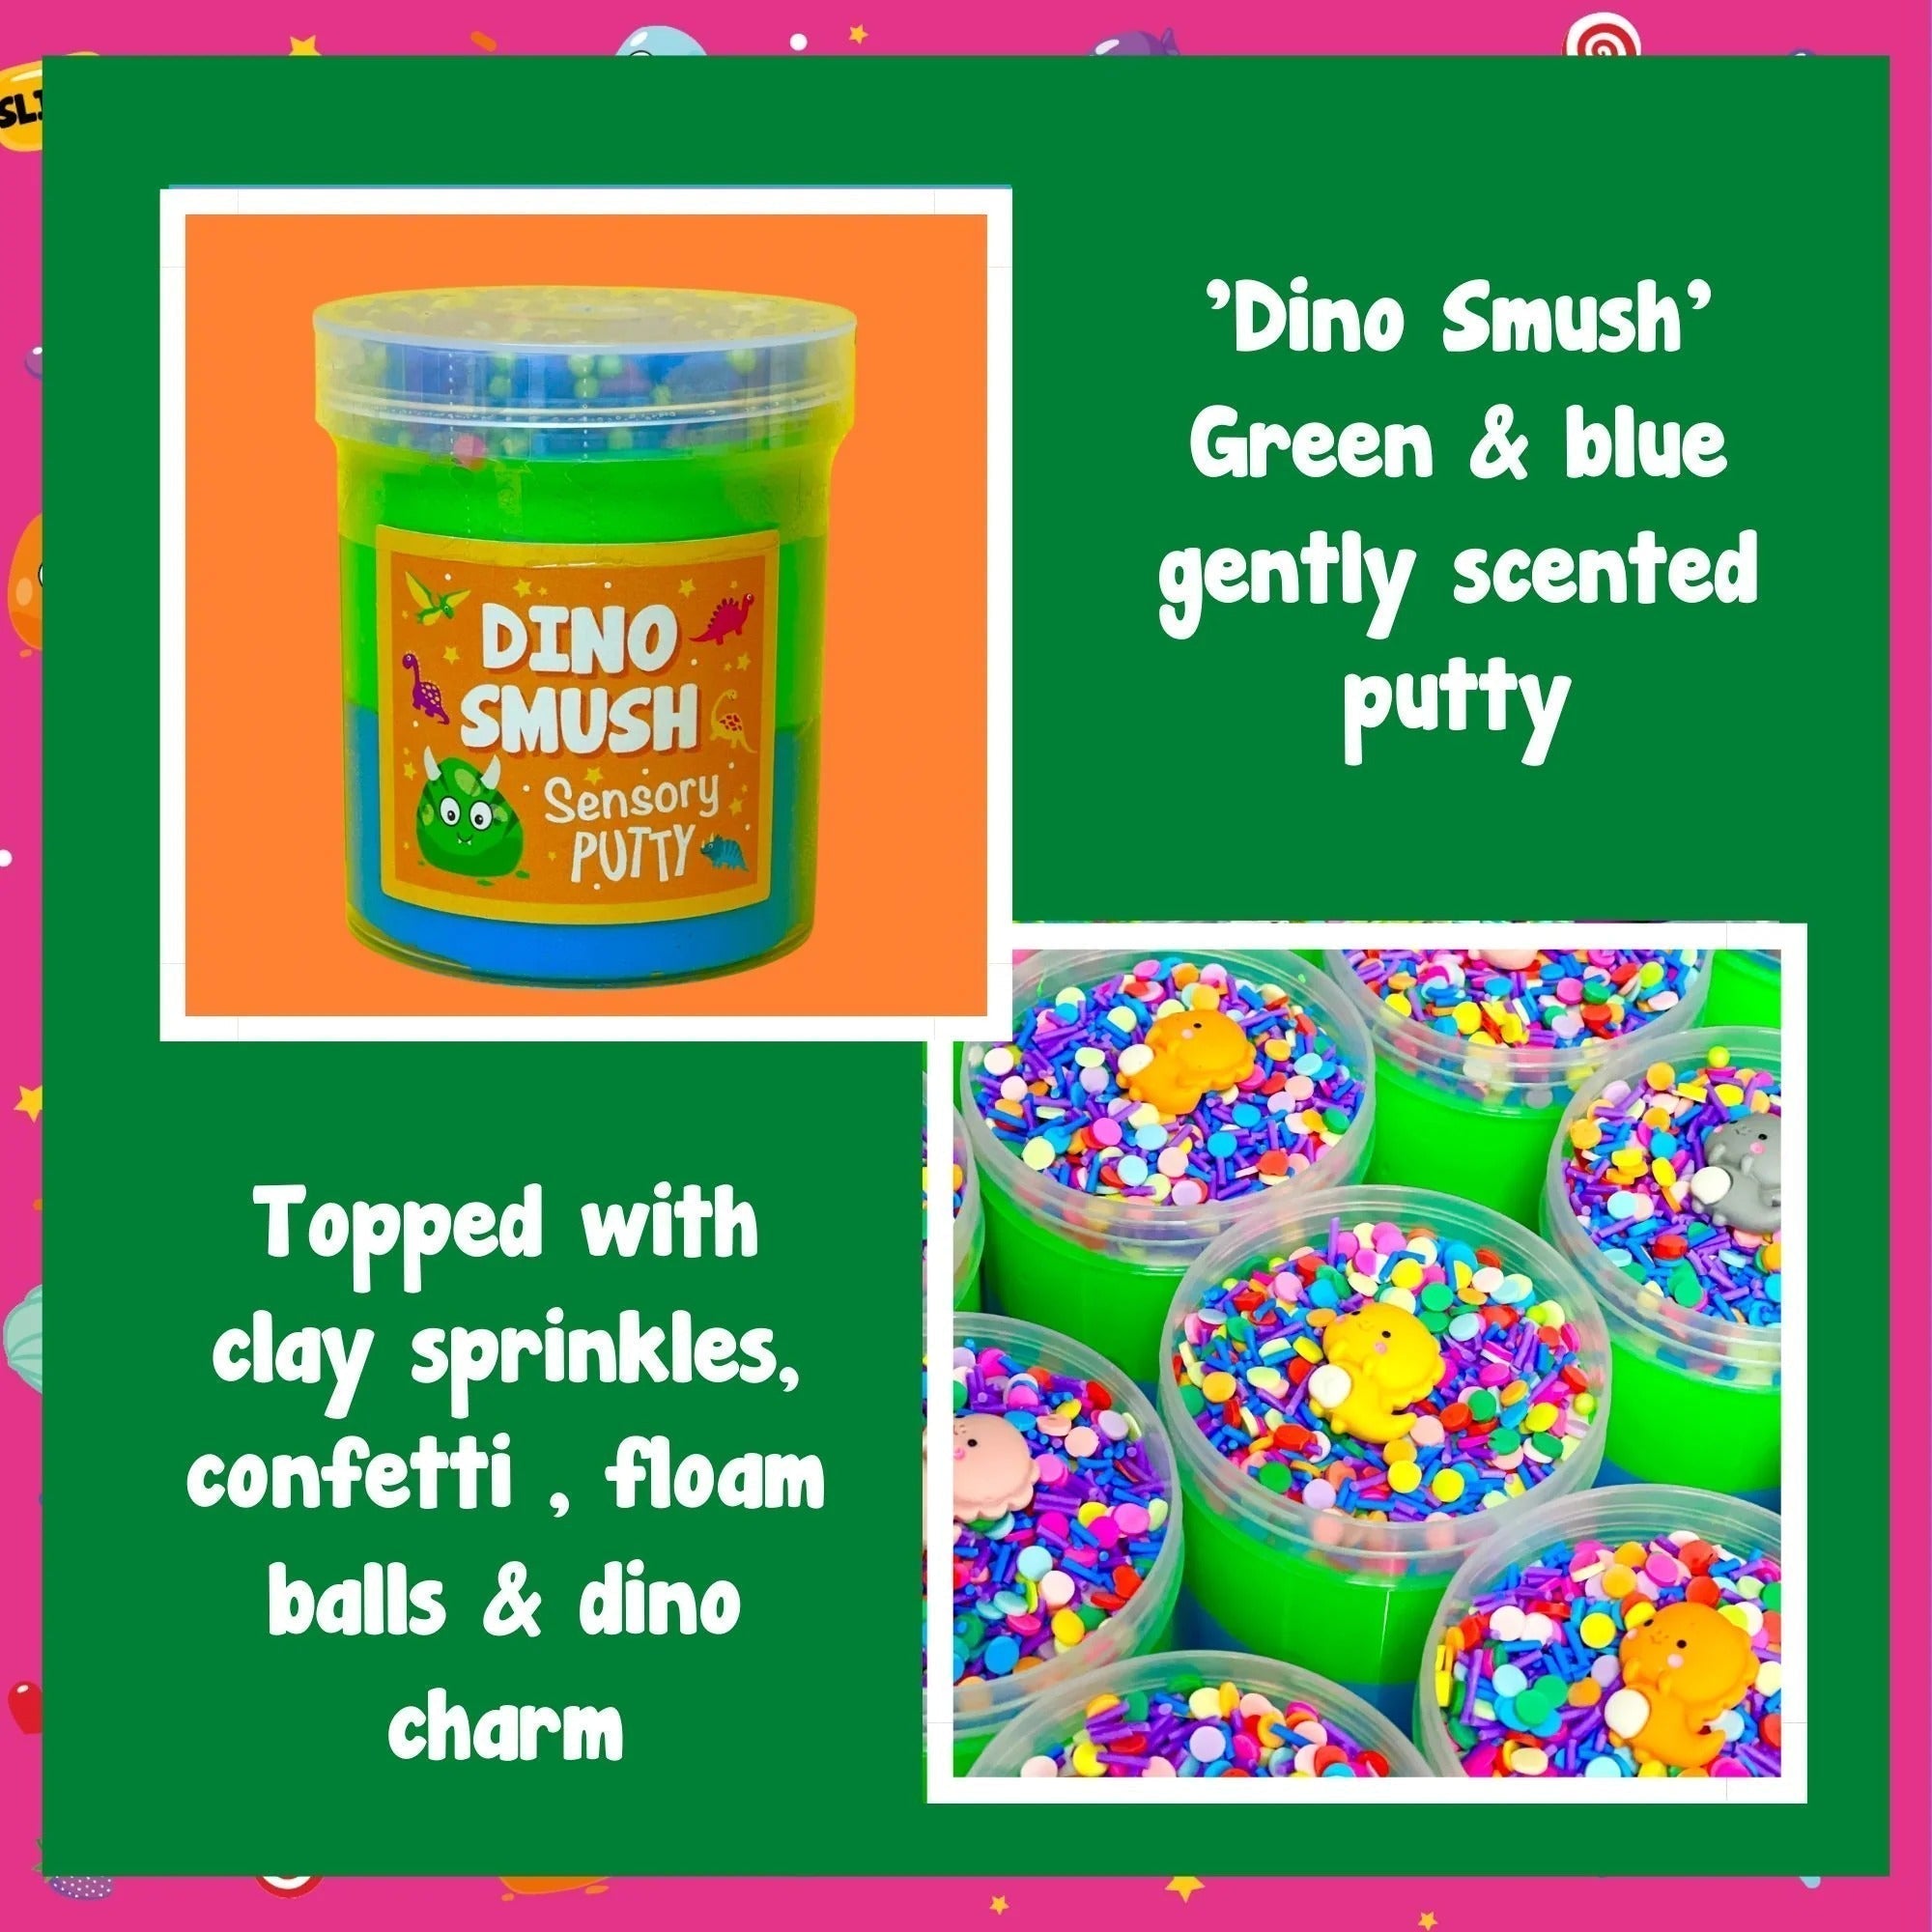 Dino Smush Putty, Our Dino Smush putty is absolutely roar-some! A duo of vibrant blue and green putty, topped with rainbow sprinkles, green and blue floam beads and an adorable dinosaur charm for all the prehistoric fun you could ever need! Putties are air reactive and will dry out of left out. Always return to the container after play with the lid tightly on. Keep away from direct sunlight. Keep away from fabrics and porous surfaces. Container Size: 275ml Ages 5+, Adult supervision recommended. Dino Smush 